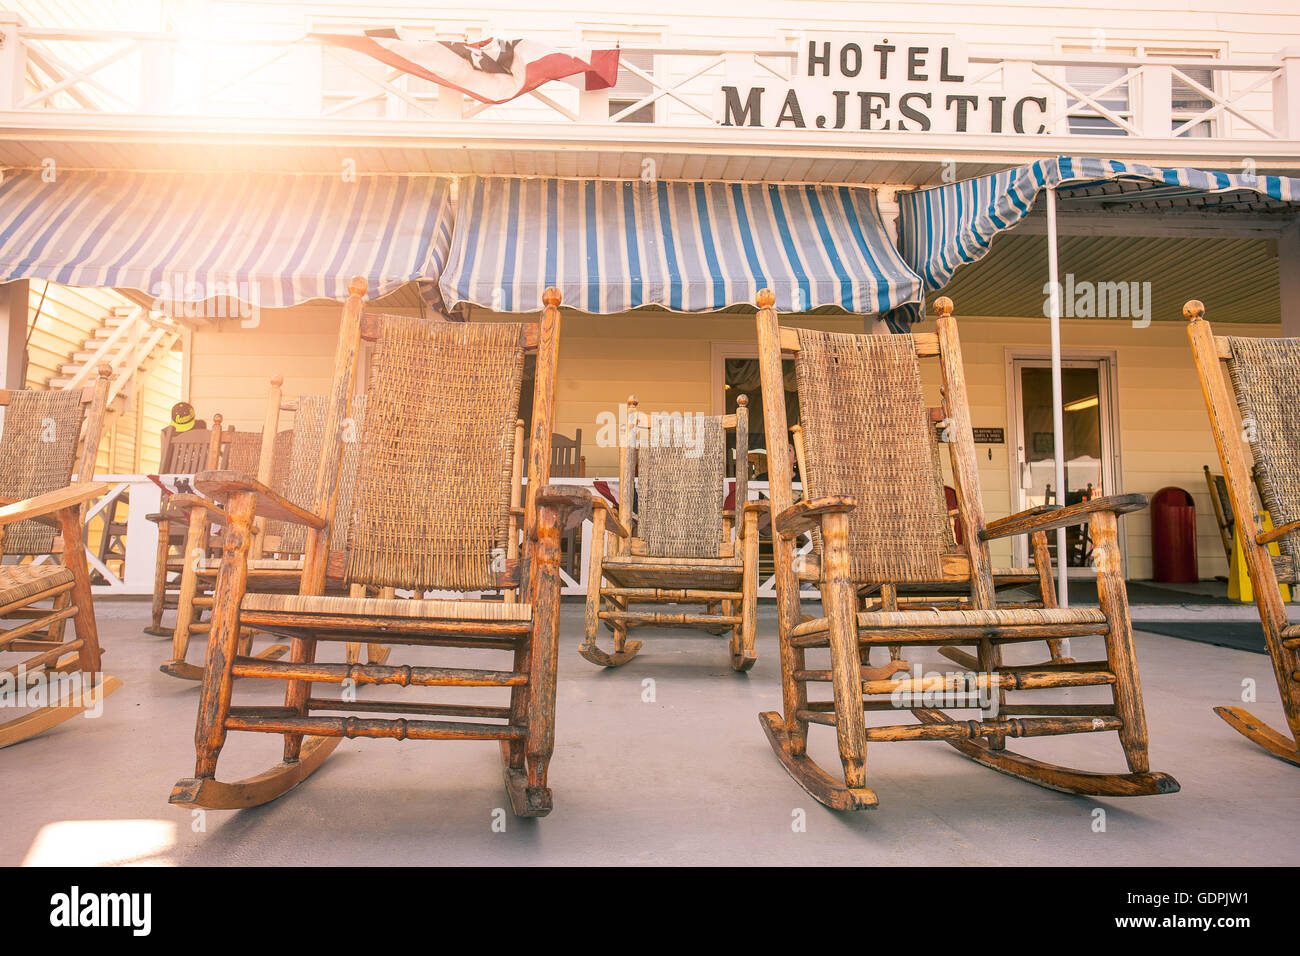 Old-fashioned wicker rocking chairs on traditional style resort hotel porch in late afternoon summer sun. Stock Photo